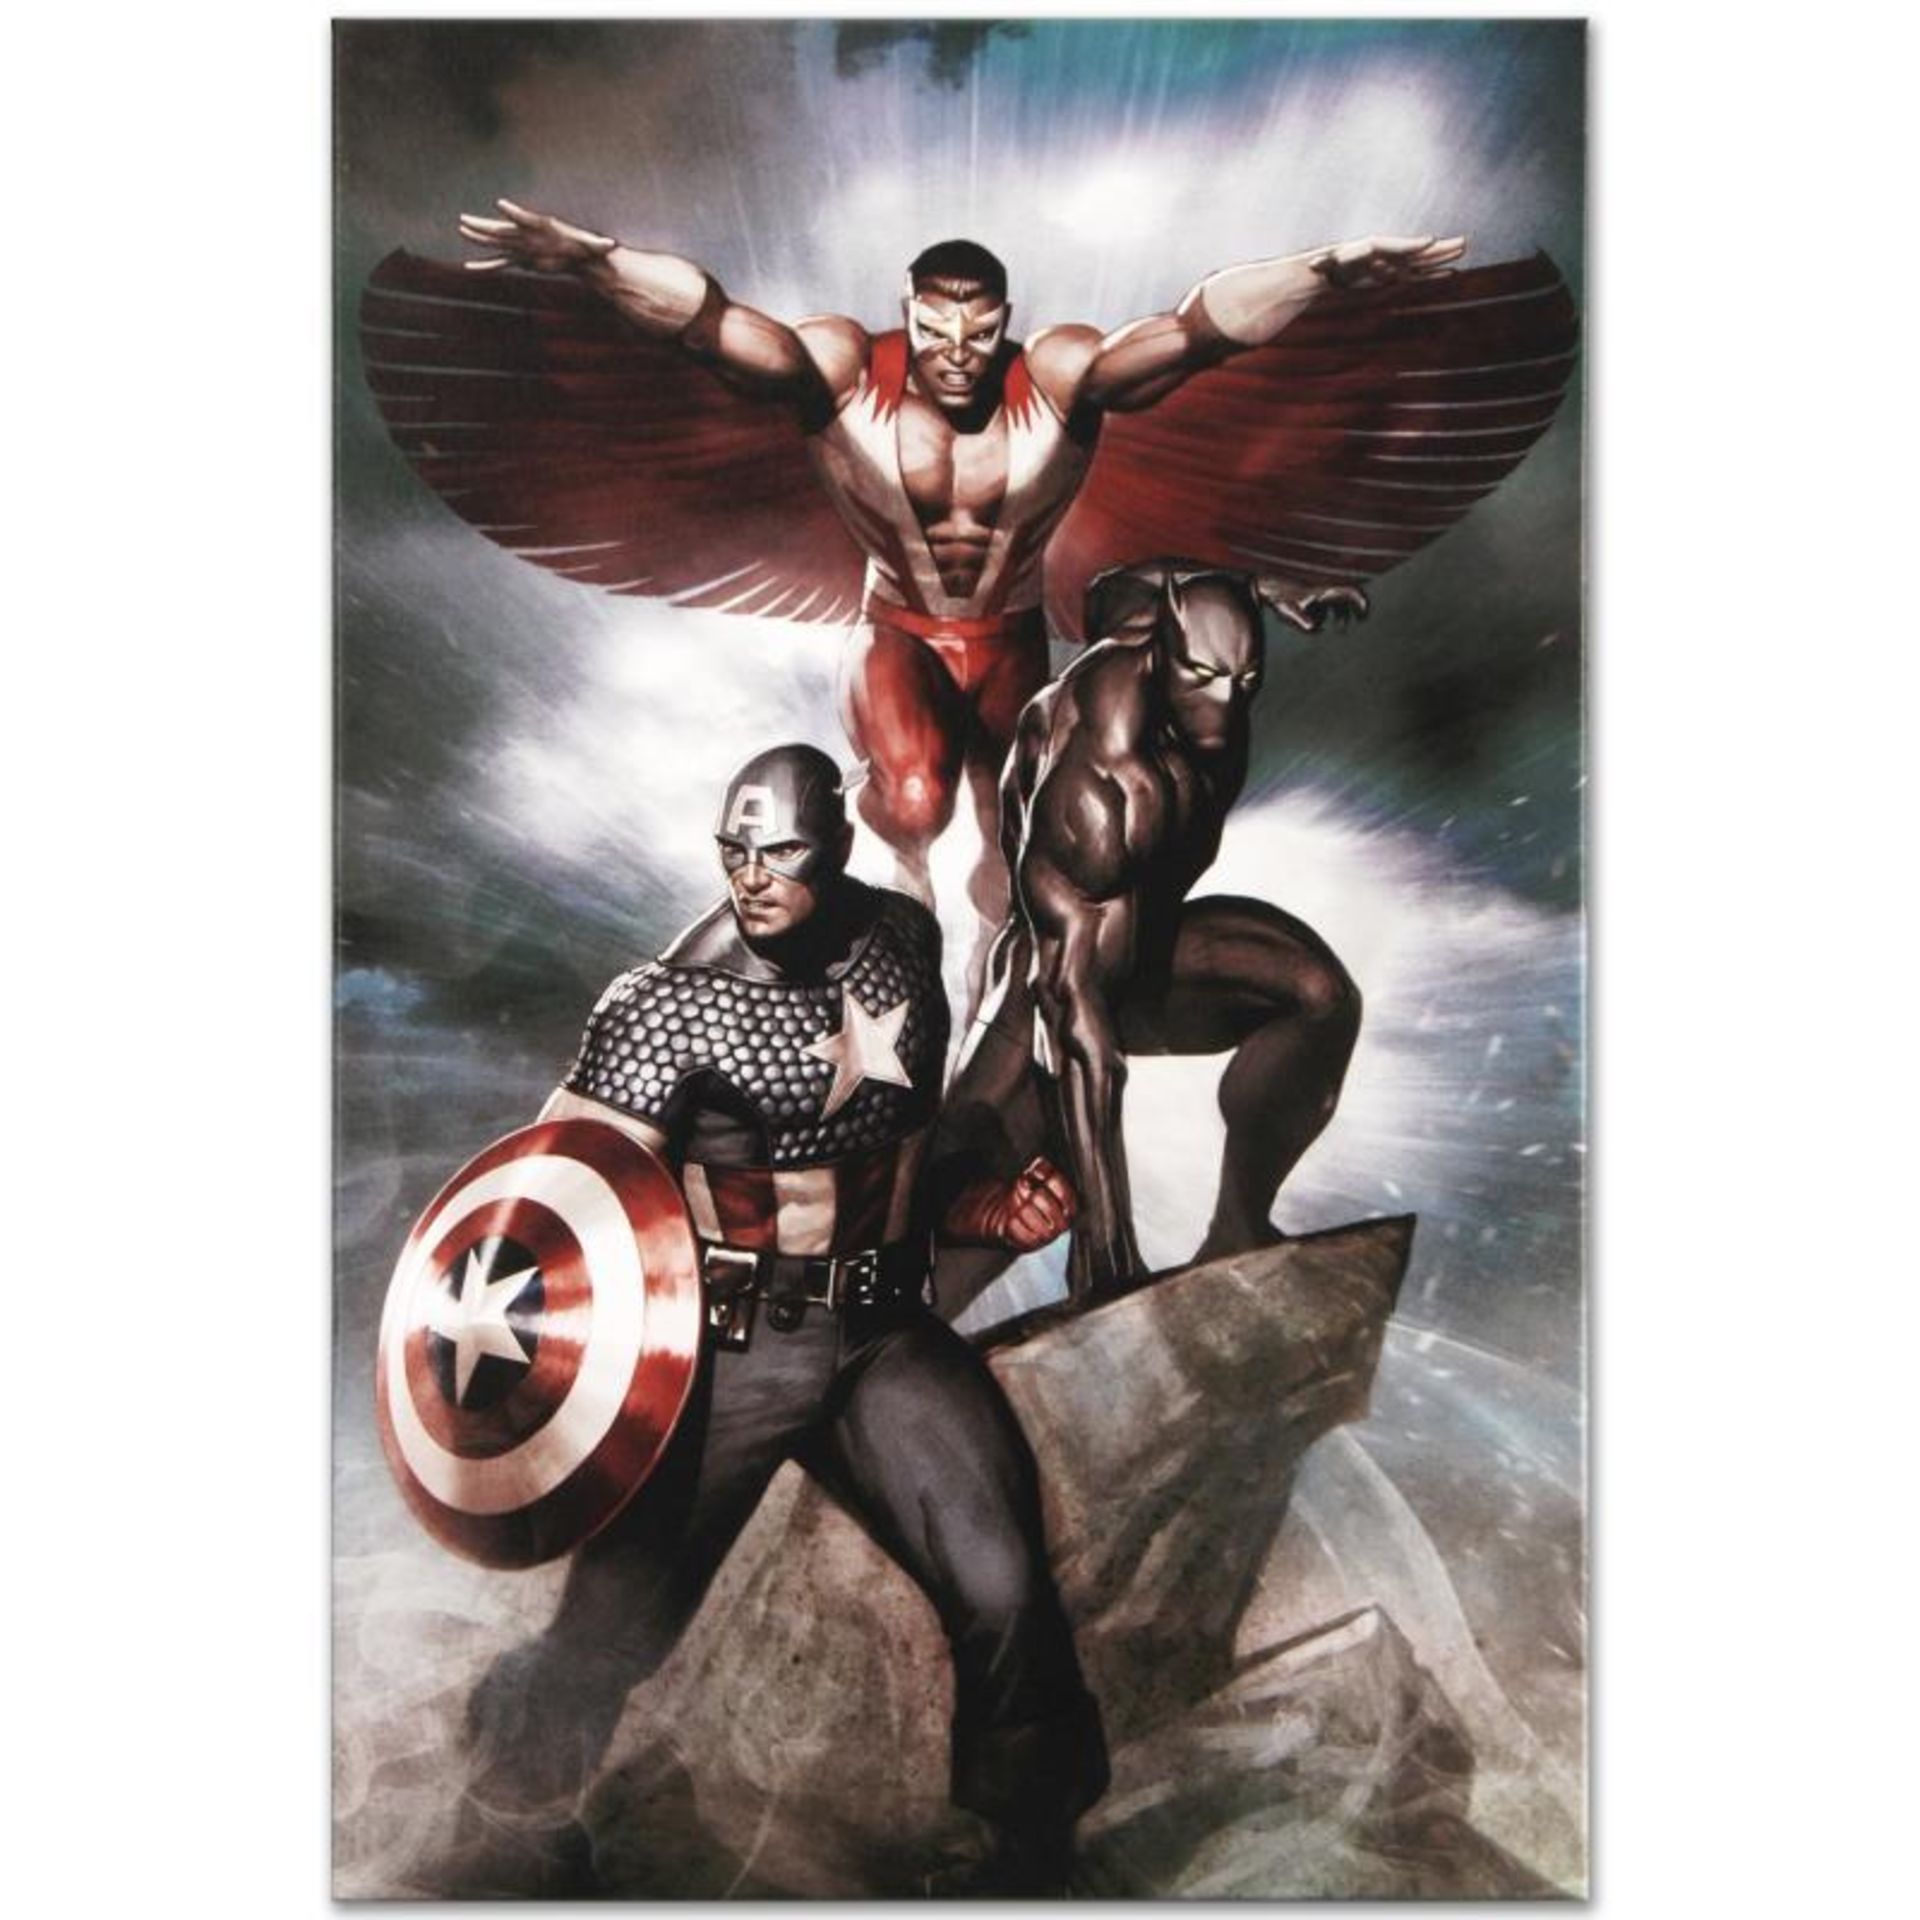 Marvel Comics "Captain America: Hail Hydra #3" Numbered Limited Edition Giclee o